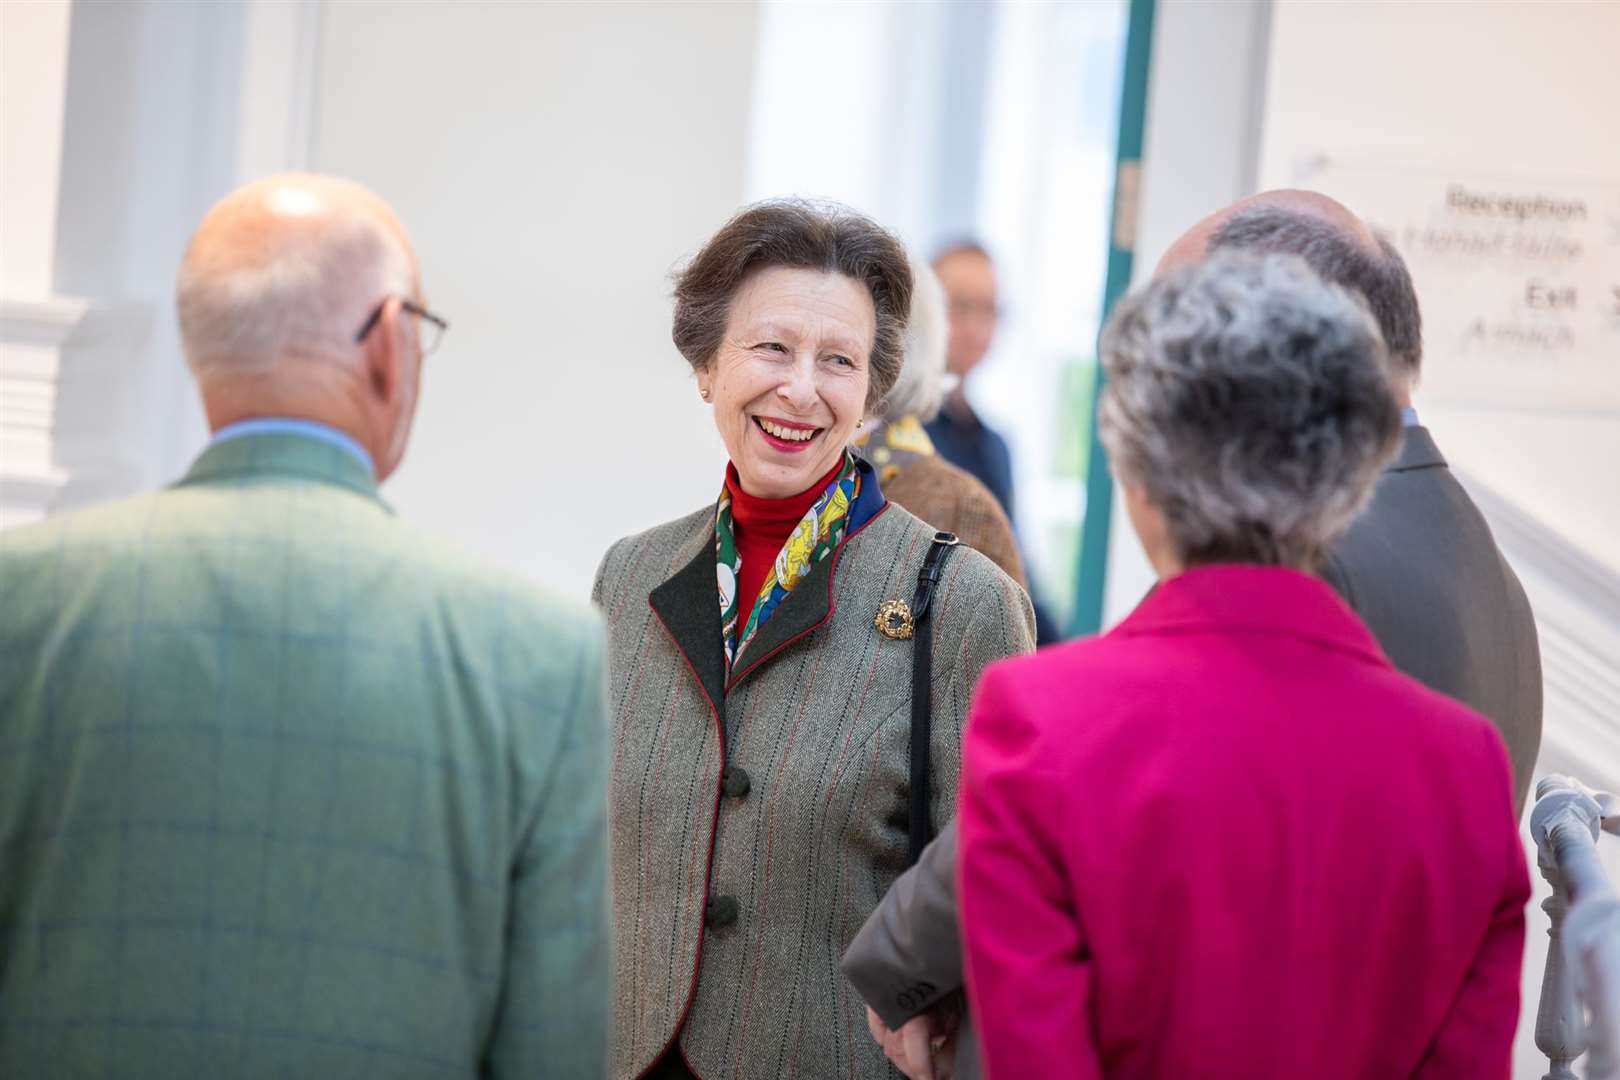 During the official visit, The Princess Royal met the key contributors to the development project, as well as Wasps staff, artists who have occupied the first phase of the Academy since its opening in 2018, and some of the more recent creative industries tenants who moved into the final phase. Photo: Paul Campbell